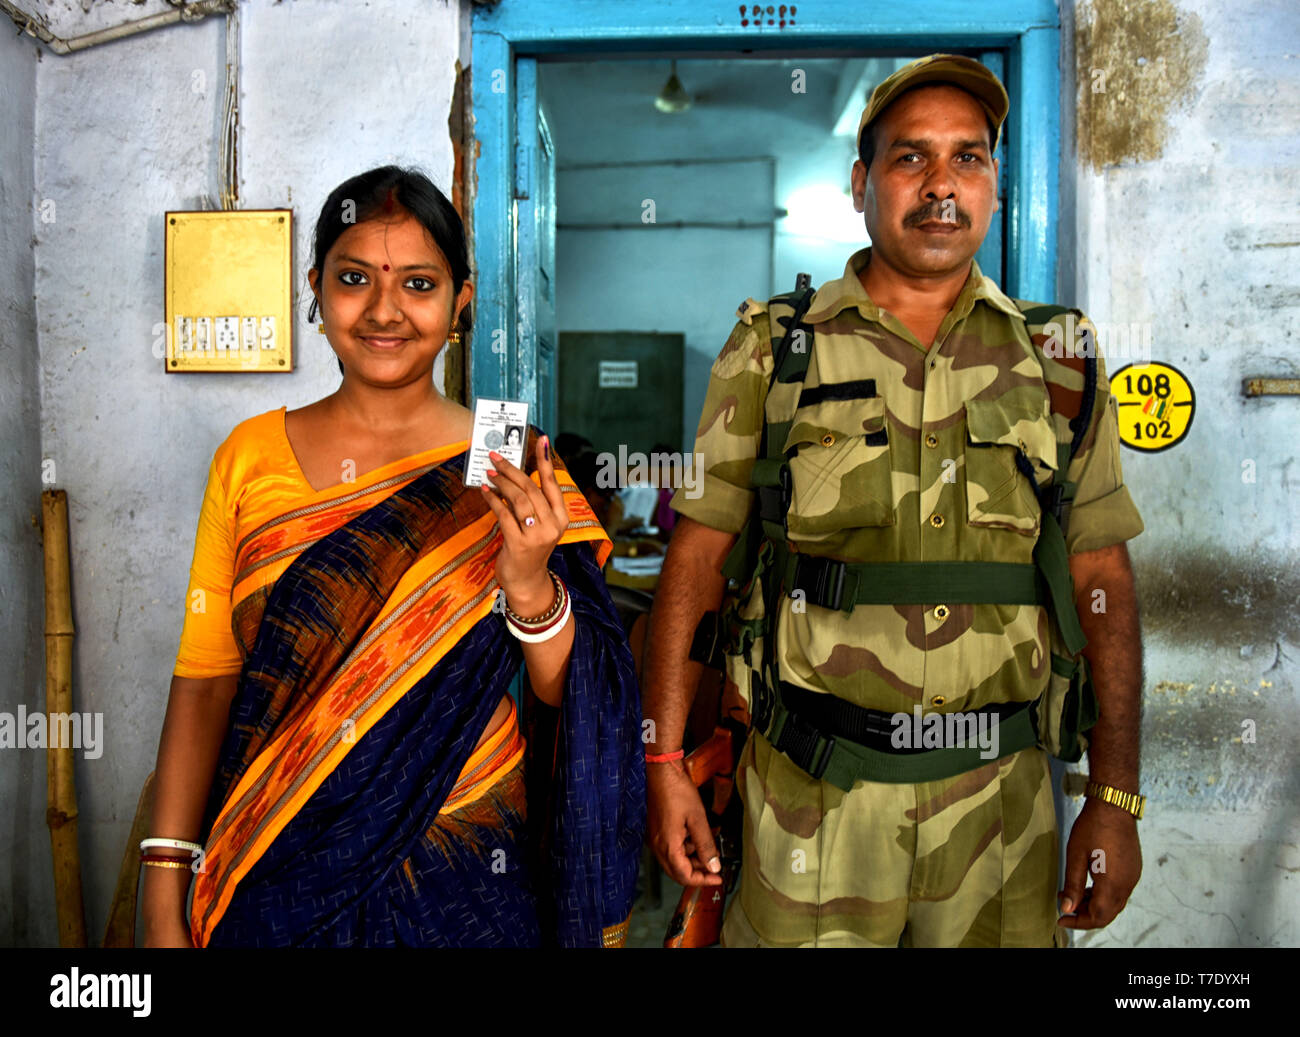 A Young woman seen showing her ink marked finger next to an armed soldier after casting the vote at a polling station during the 5th Phase of General Elections of India. Stock Photo